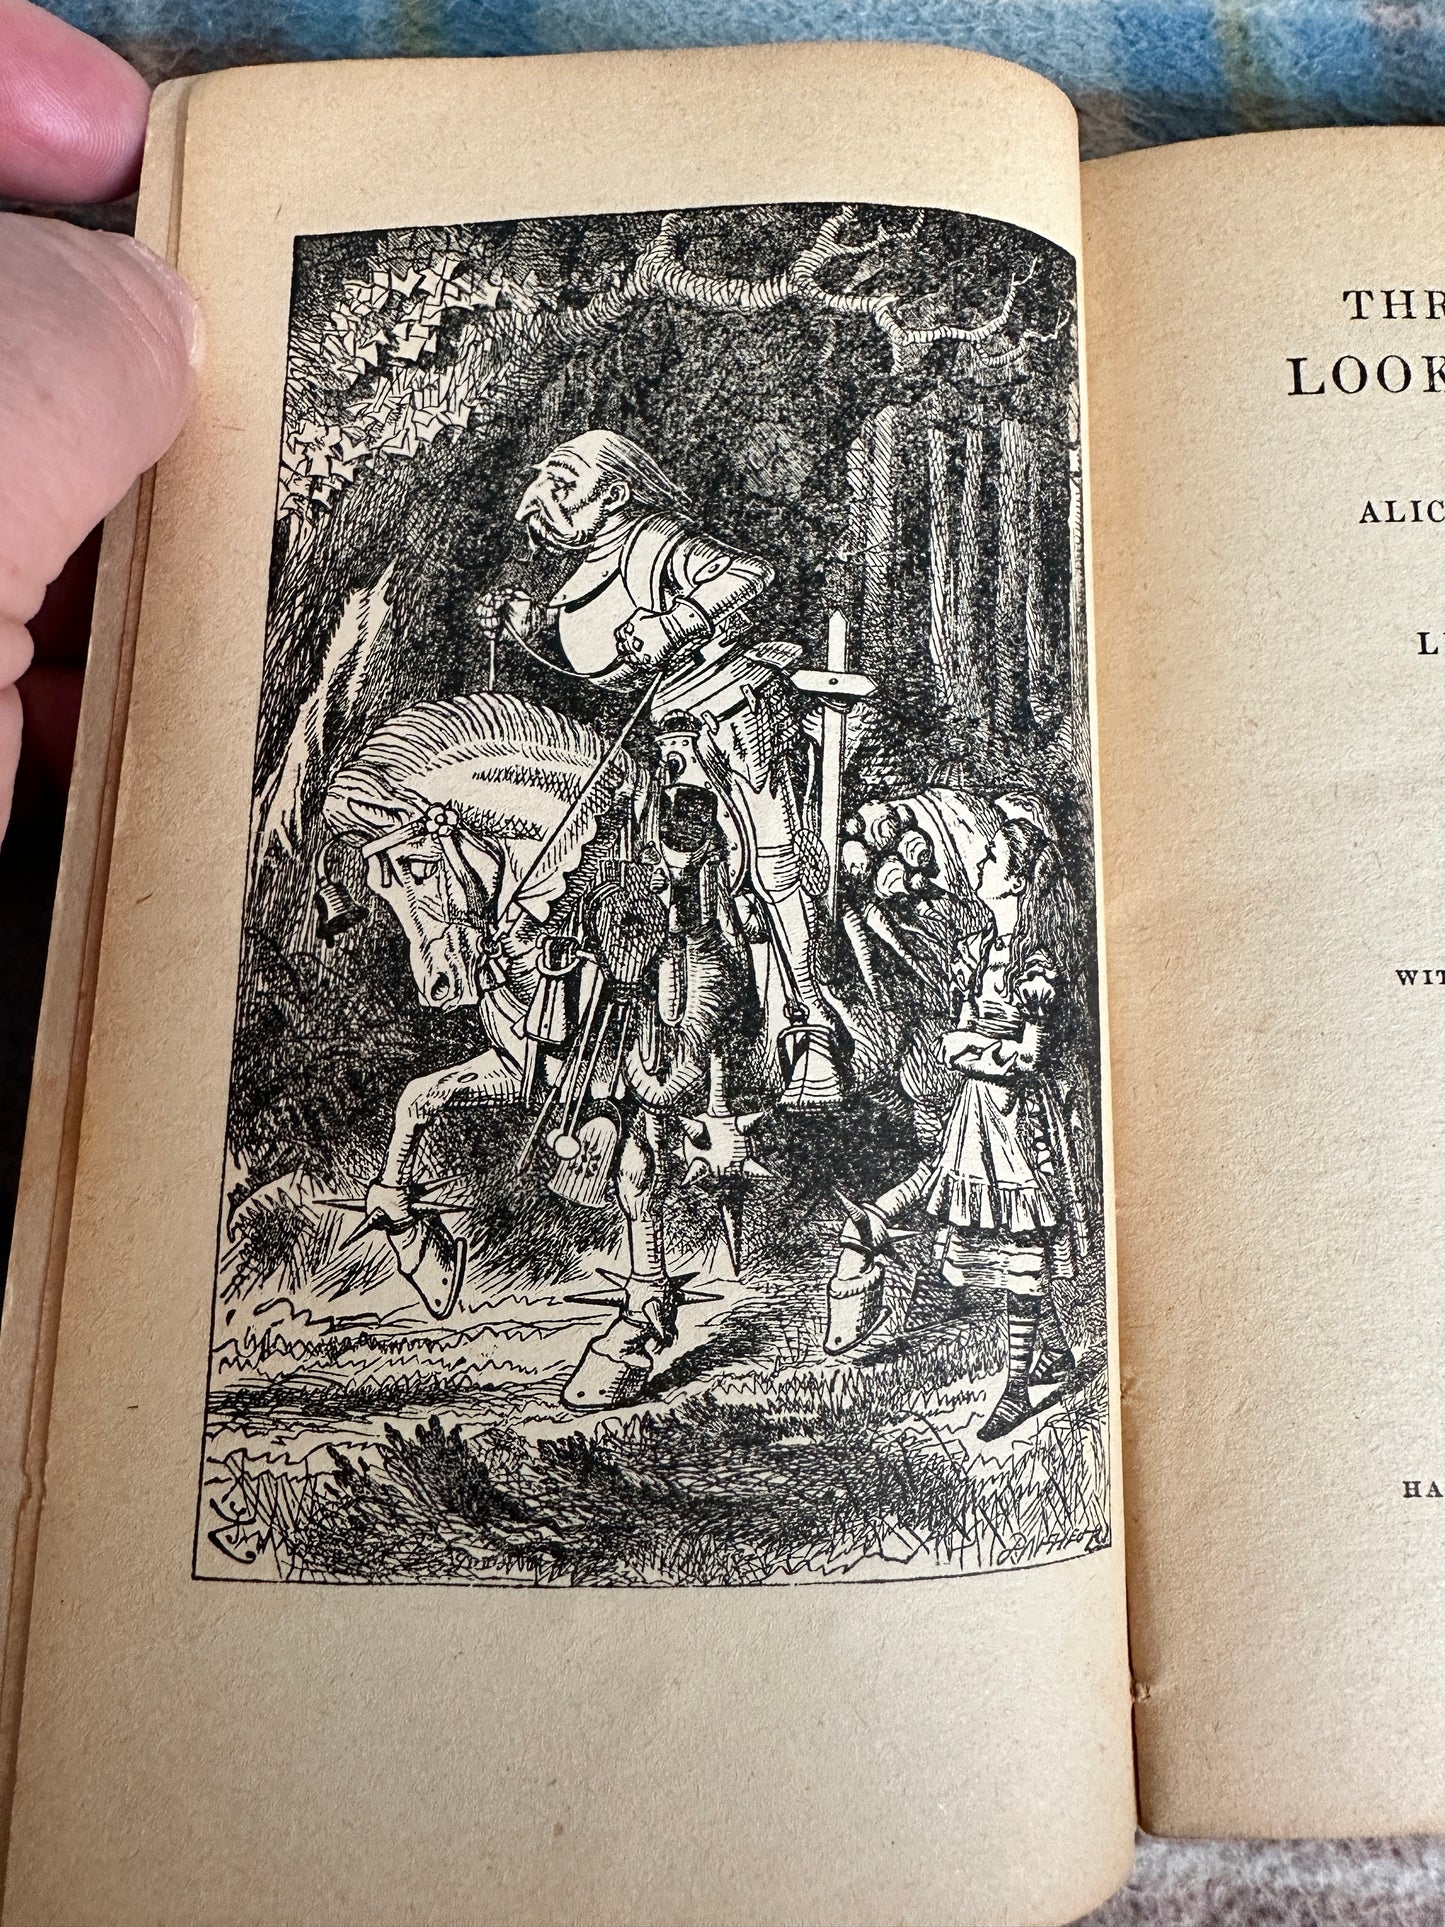 1951 Through The Looking Glass- Lewis Carroll(John Tenniel illustrated)Puffin Story Book